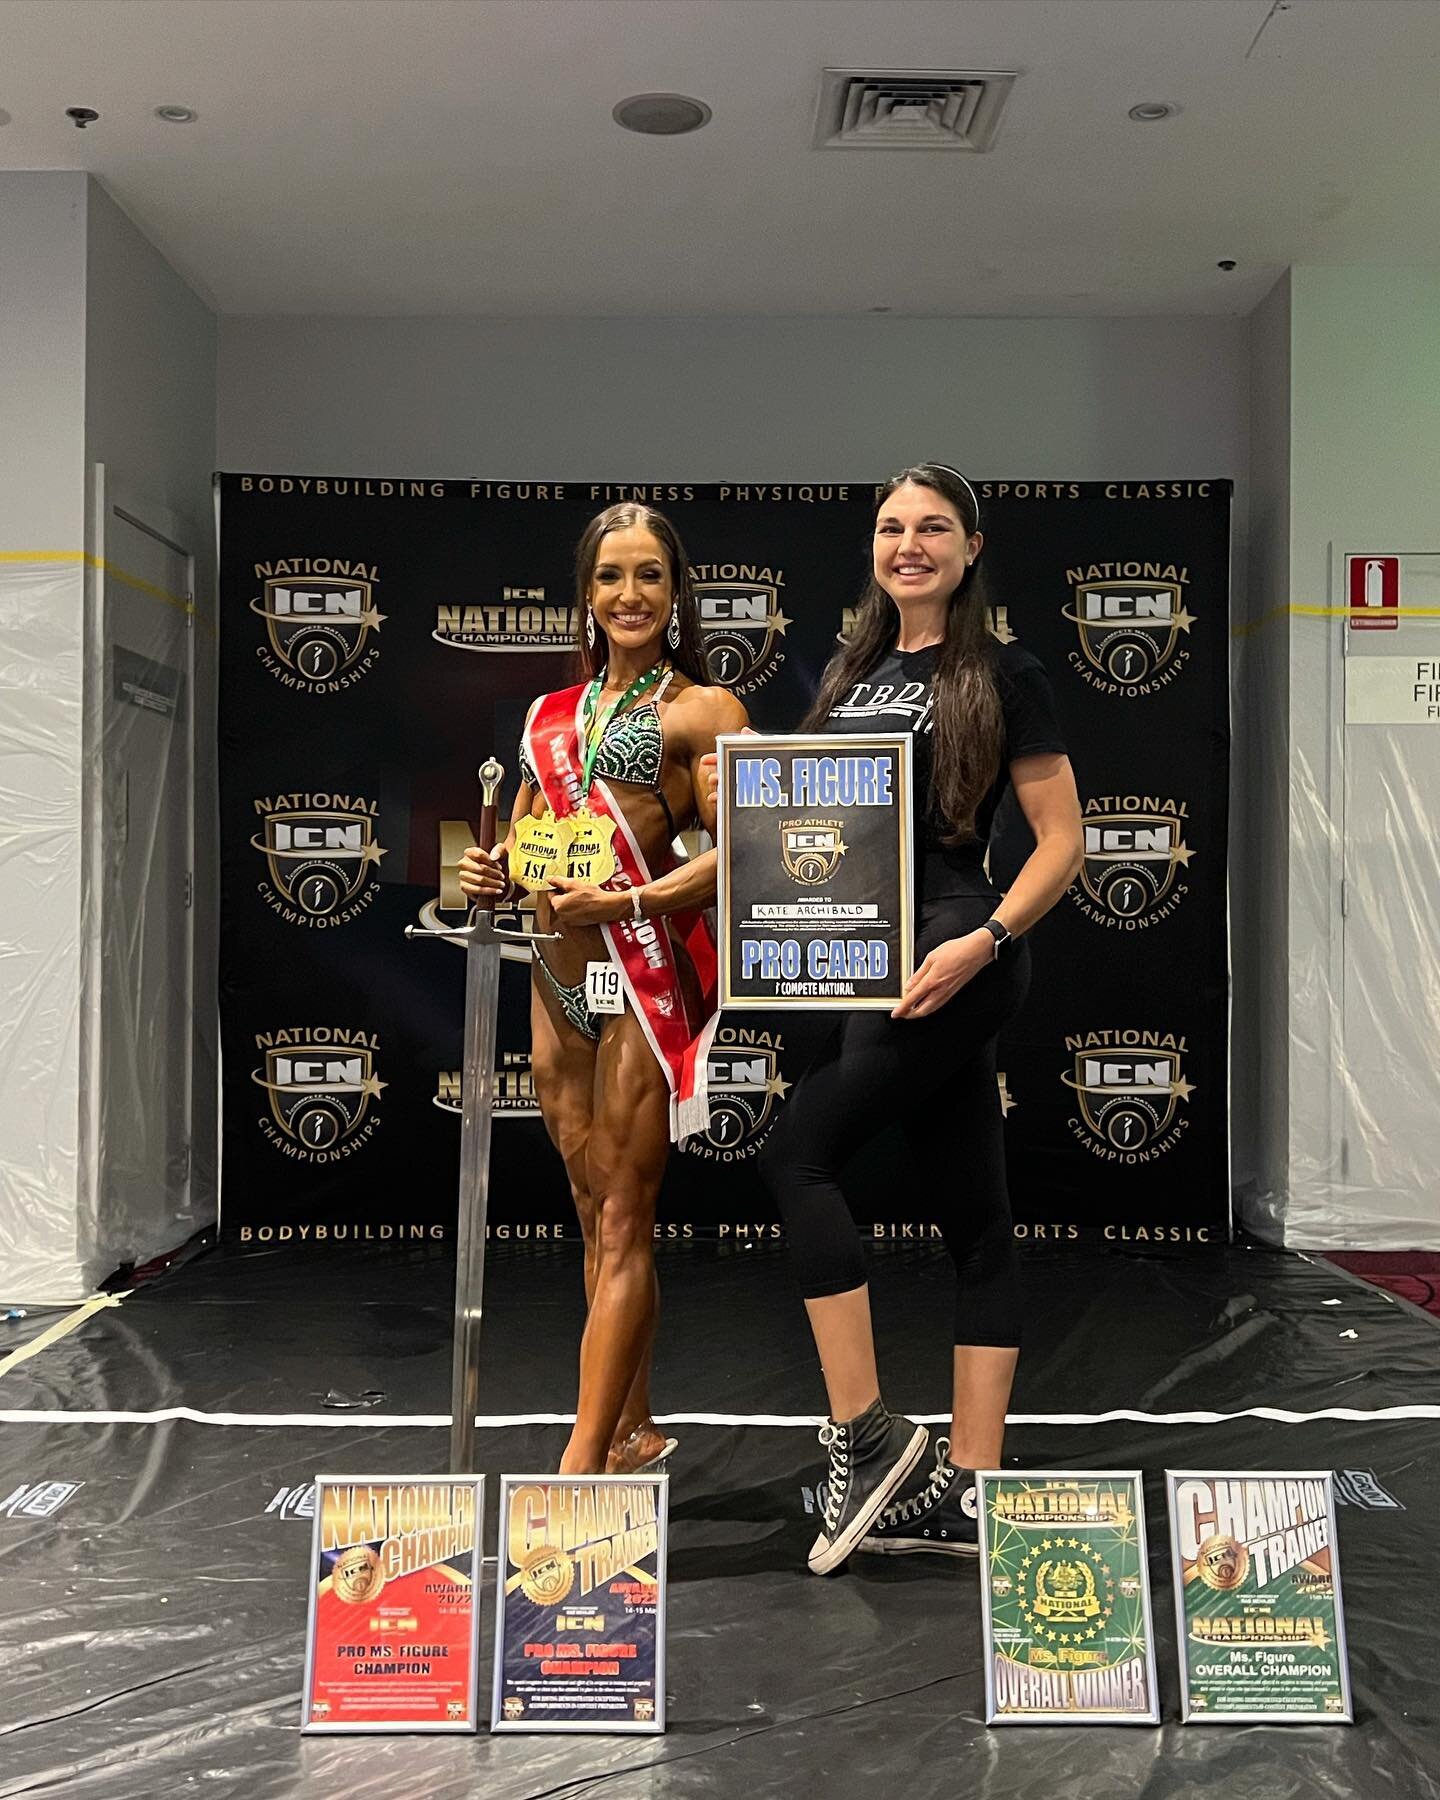 Introducing ICN&rsquo;s newest Figure Pro @_katearchibald 🗡👑

Six months ago we set out with the goal to win an overall in sports model&hellip; today we walked away with an ICN pro card in Ms. Figure and Kate also took home 🥇 in her pro debut at t